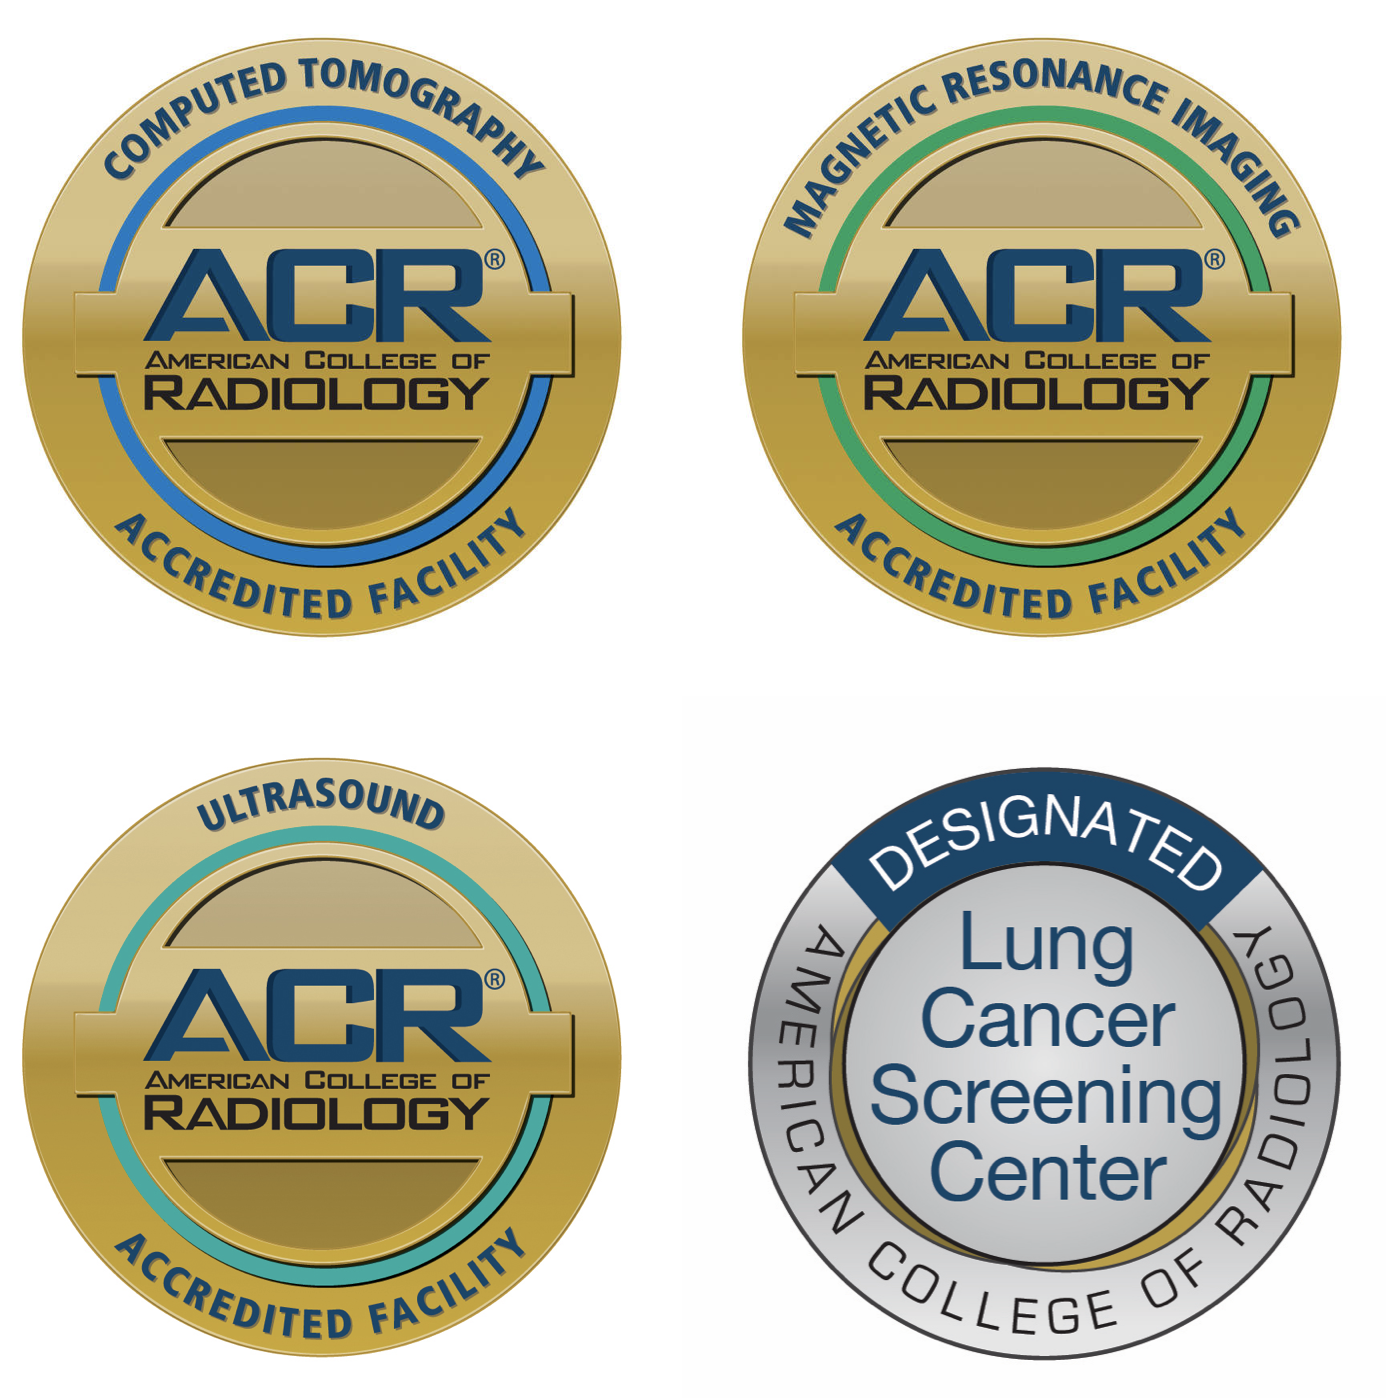 American College of Radiology Accredited Facility: CT, MRI, Ultrasound. Designated Lung Cancer Screening Center.